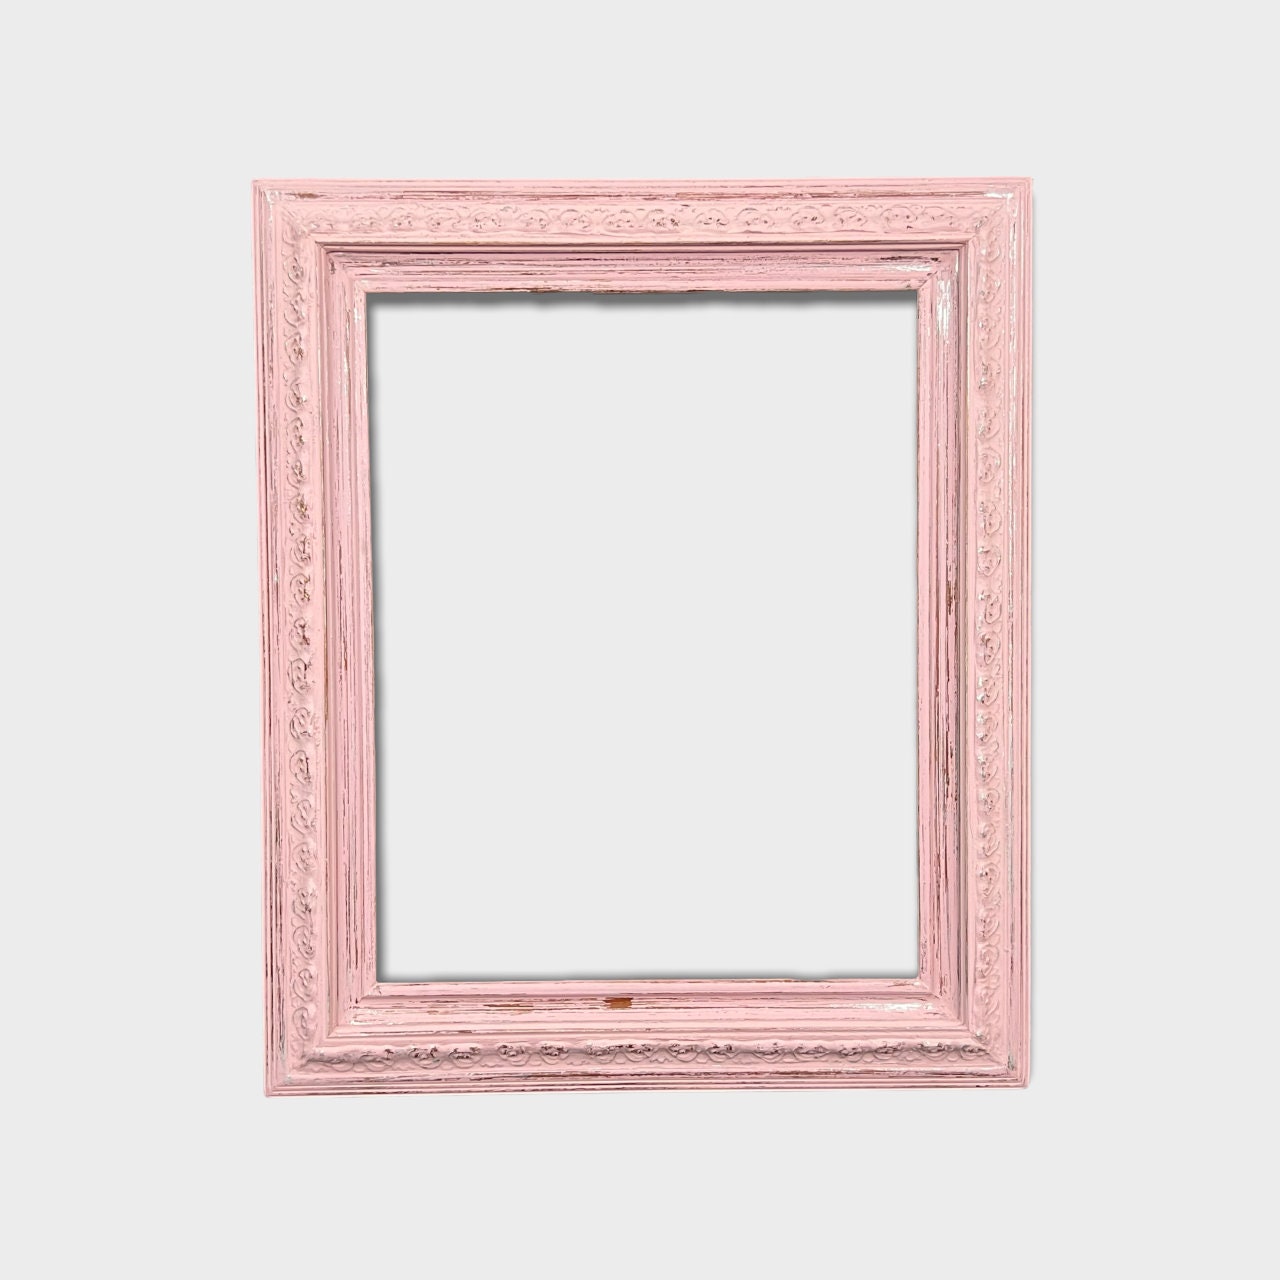 Pink Shabby Chic Wooden Picture Frame Victoriana Sicure Fits a 4x6" Photo  